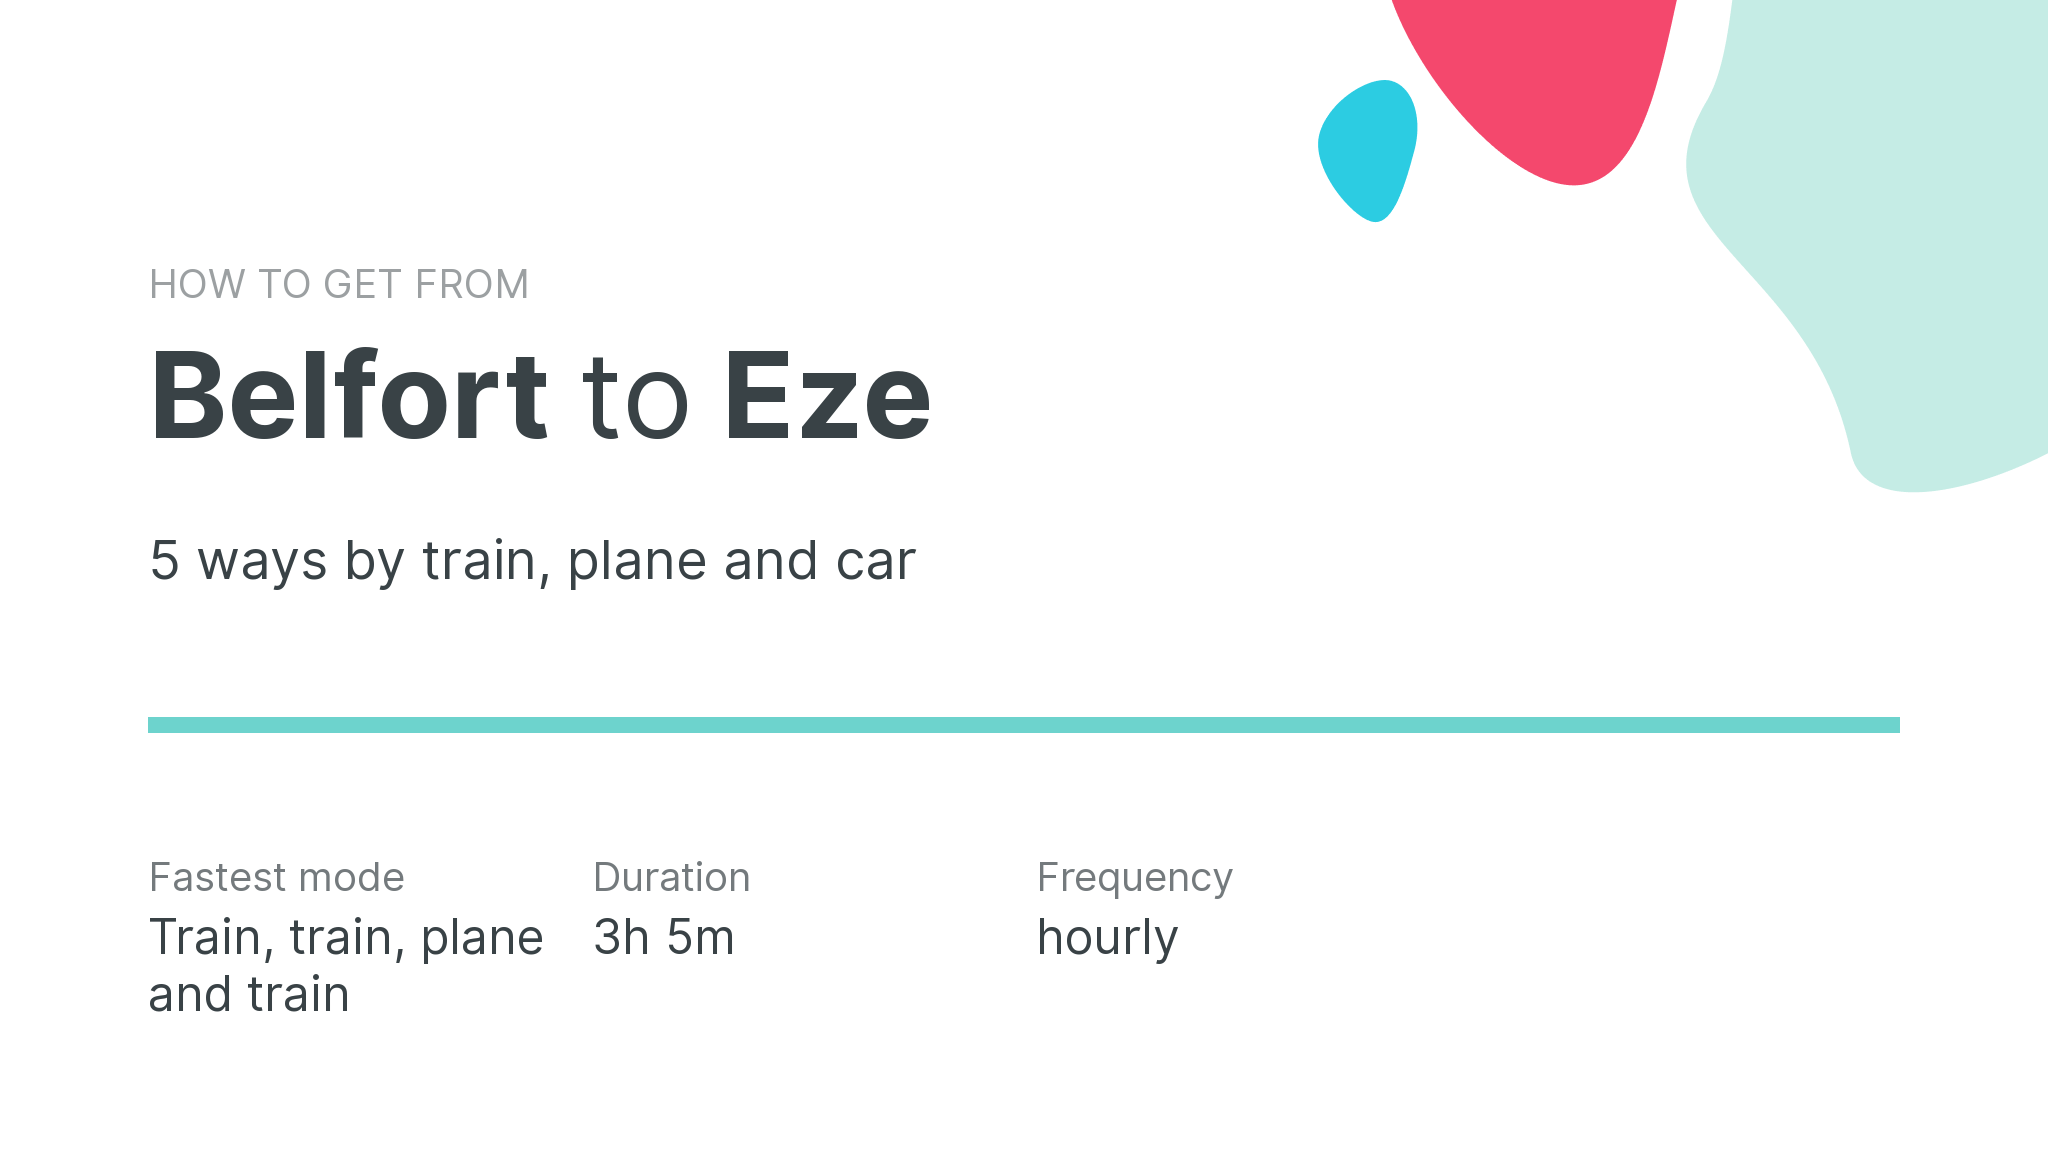 How do I get from Belfort to Eze